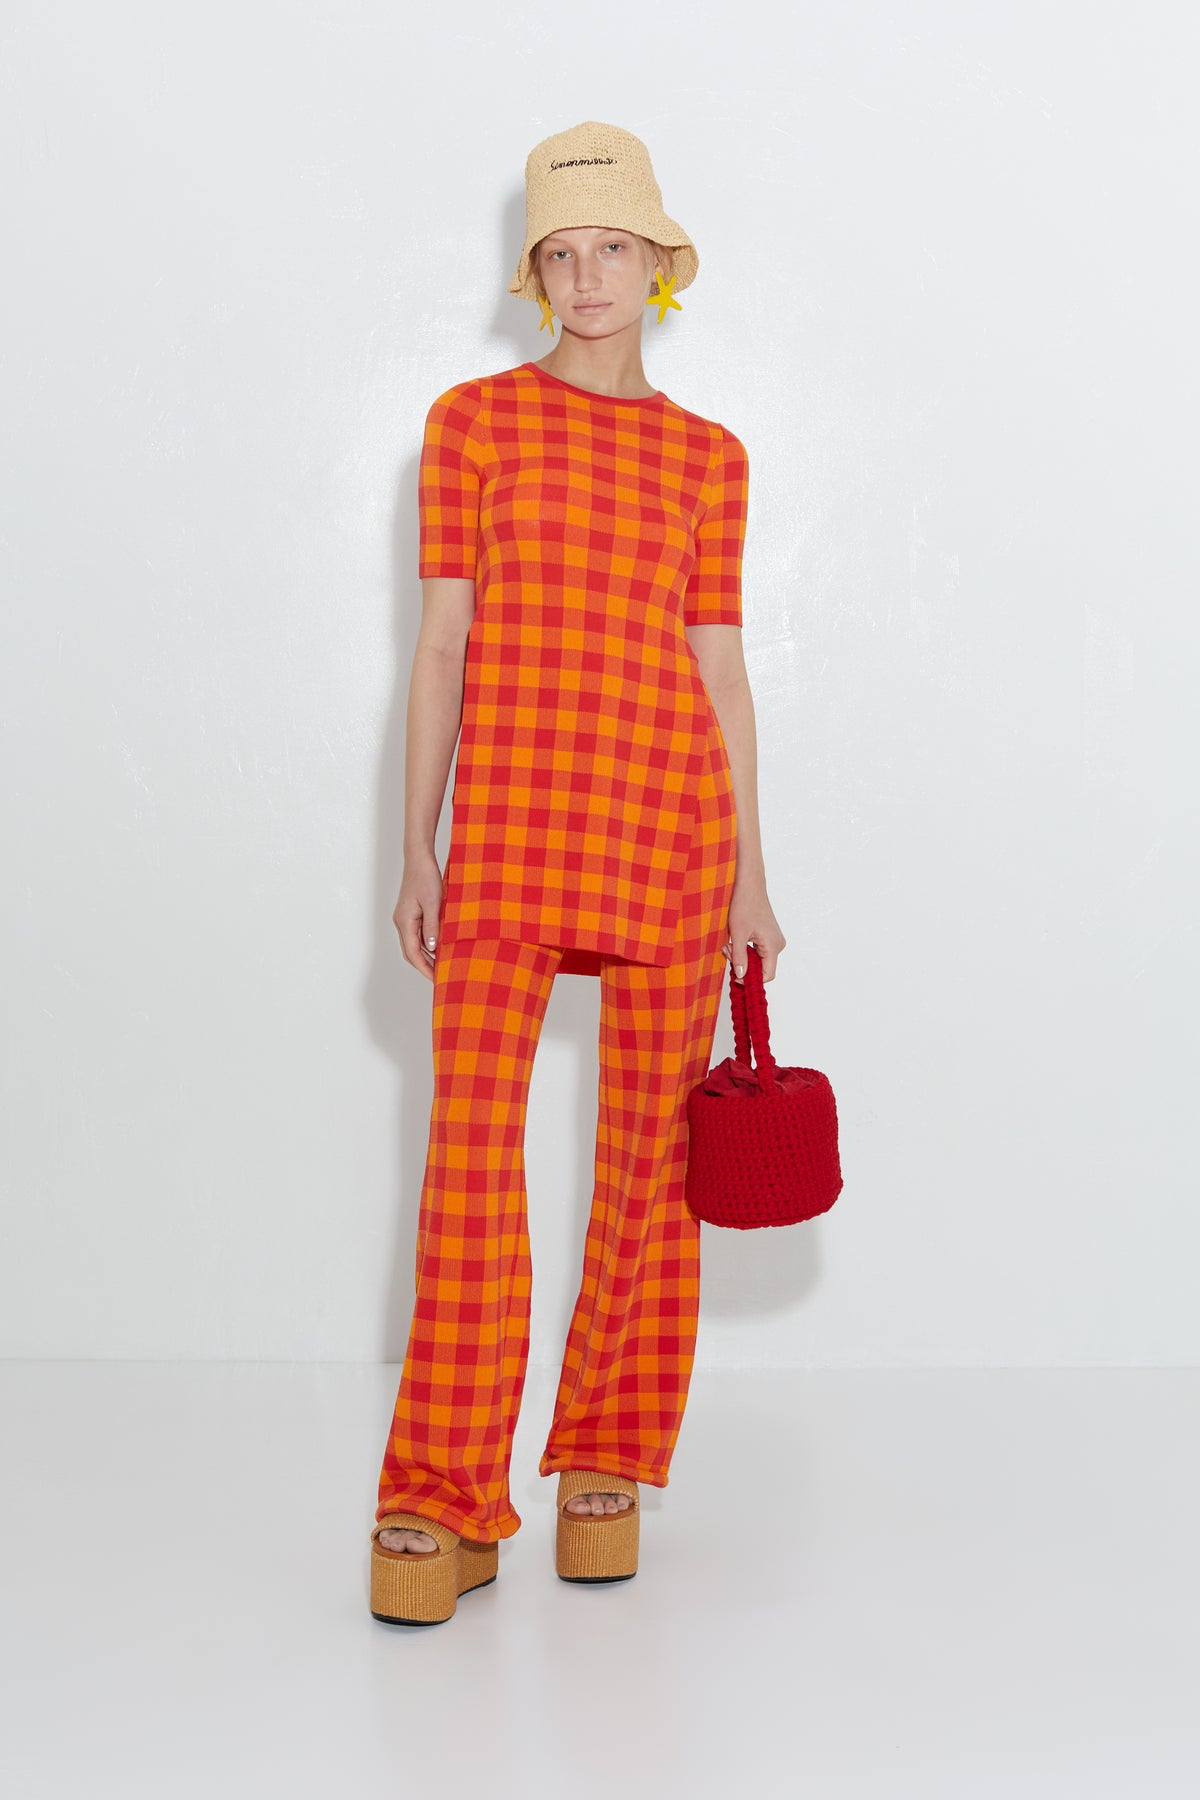 Knits By Canoga Short Sleeve Top in Retro Red Gingham